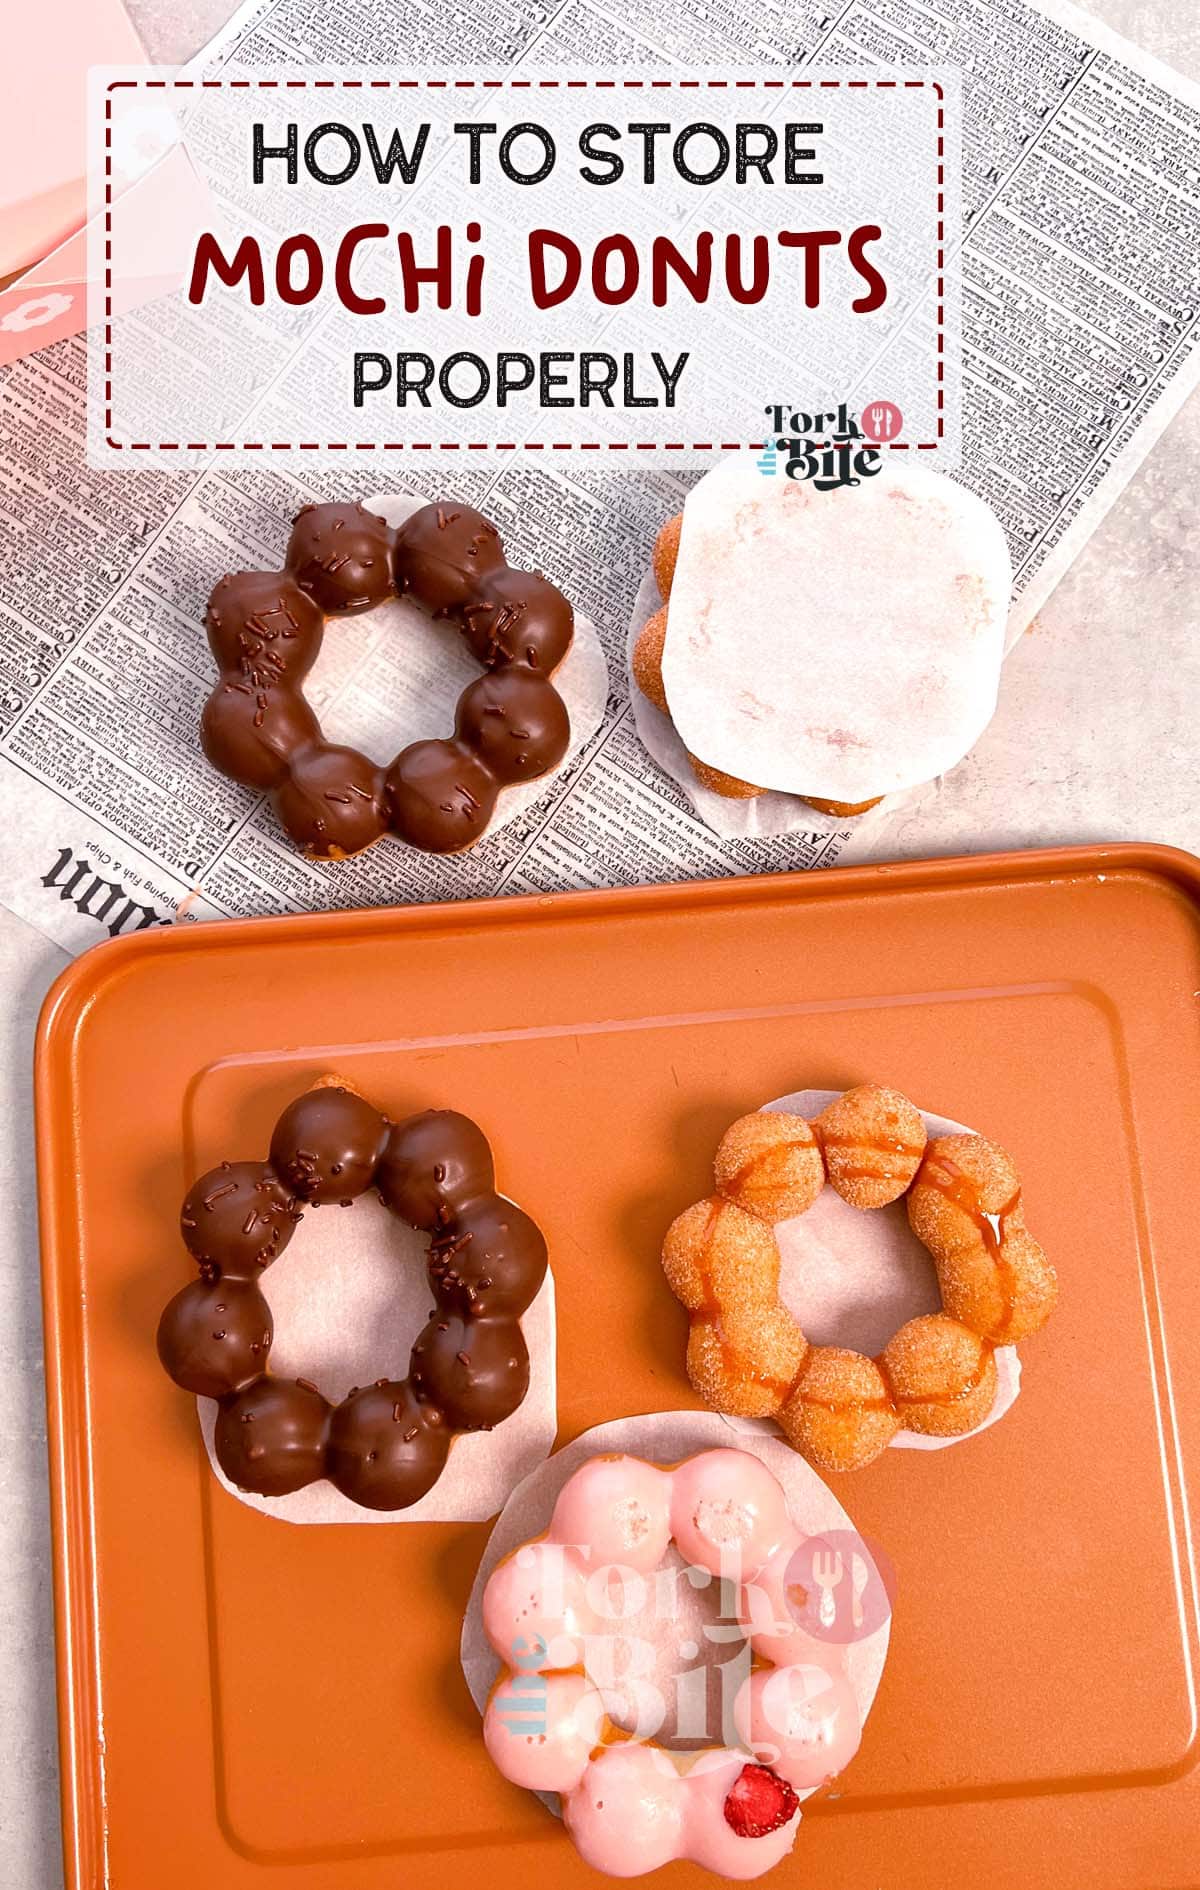 Learn how to store Mochi donuts with our easy step-by-step guide! Keep your donuts fresh, soft, and delicious while preserving their unique texture and flavors.